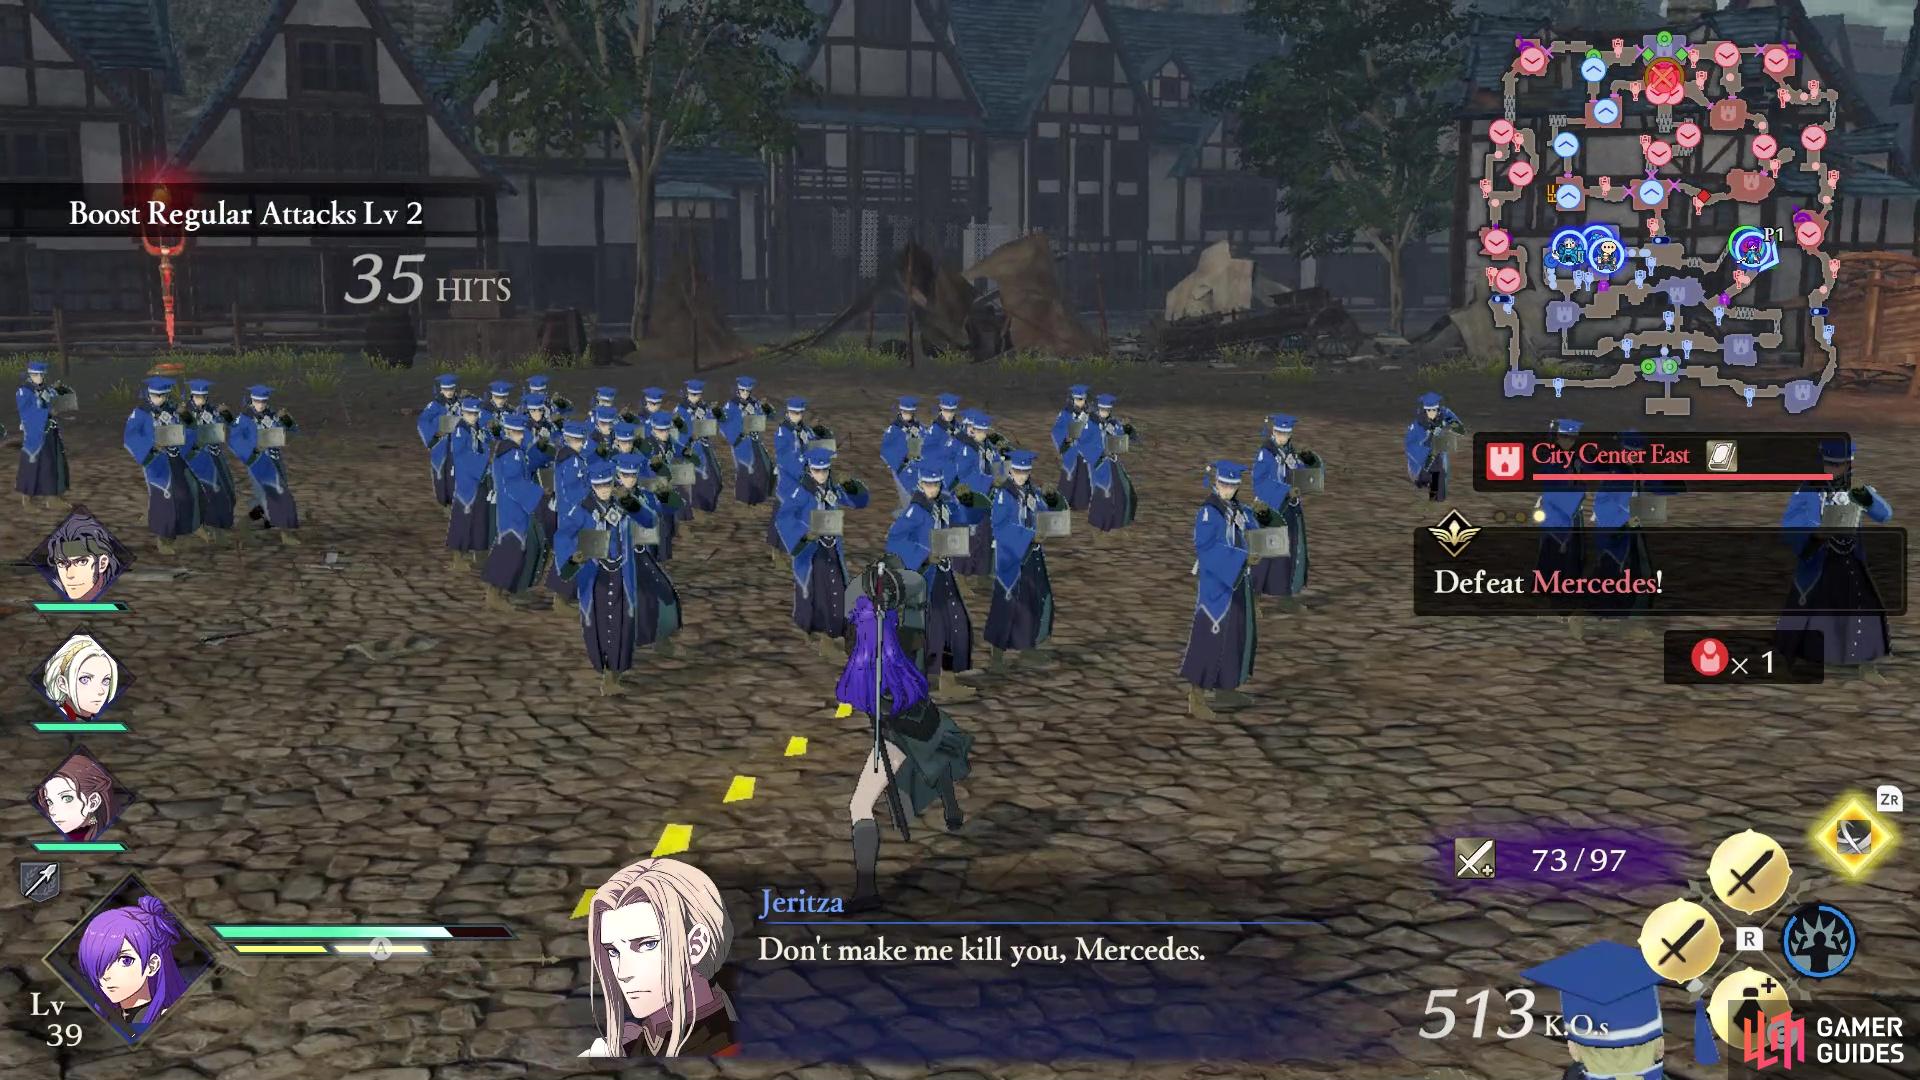 You will need Jeritz on the battlefield to recruit her